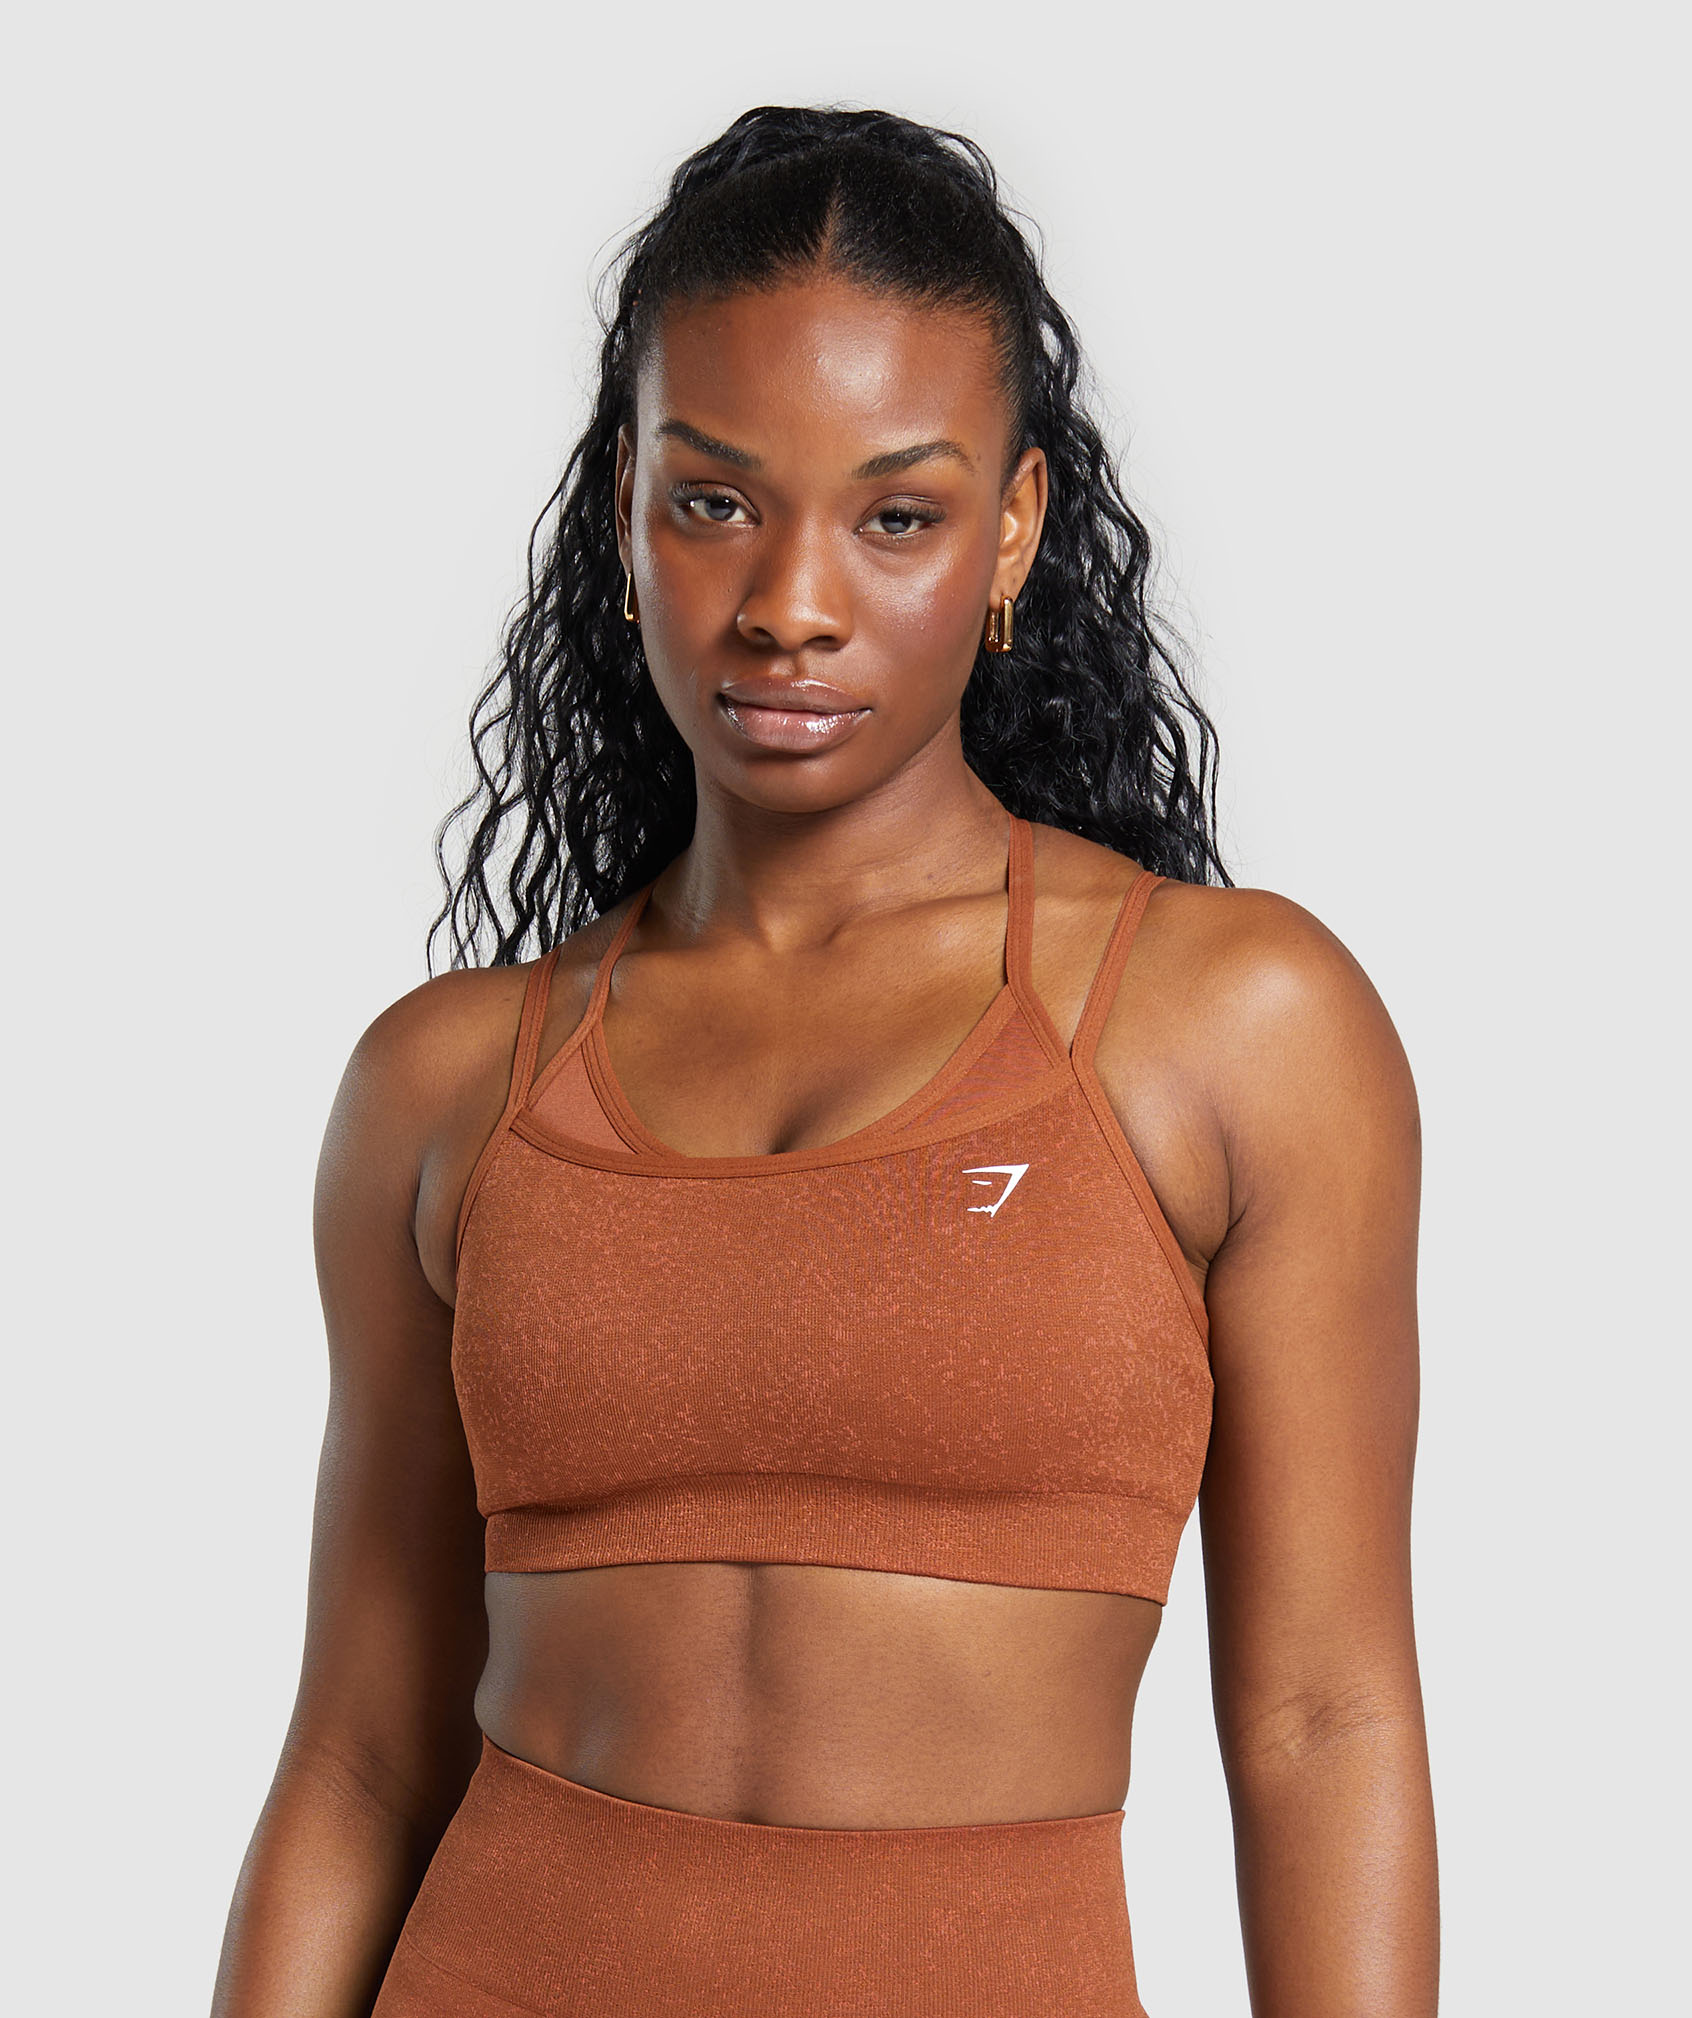 Finding the Right Sports Bra for You: A Guide by Breast Size